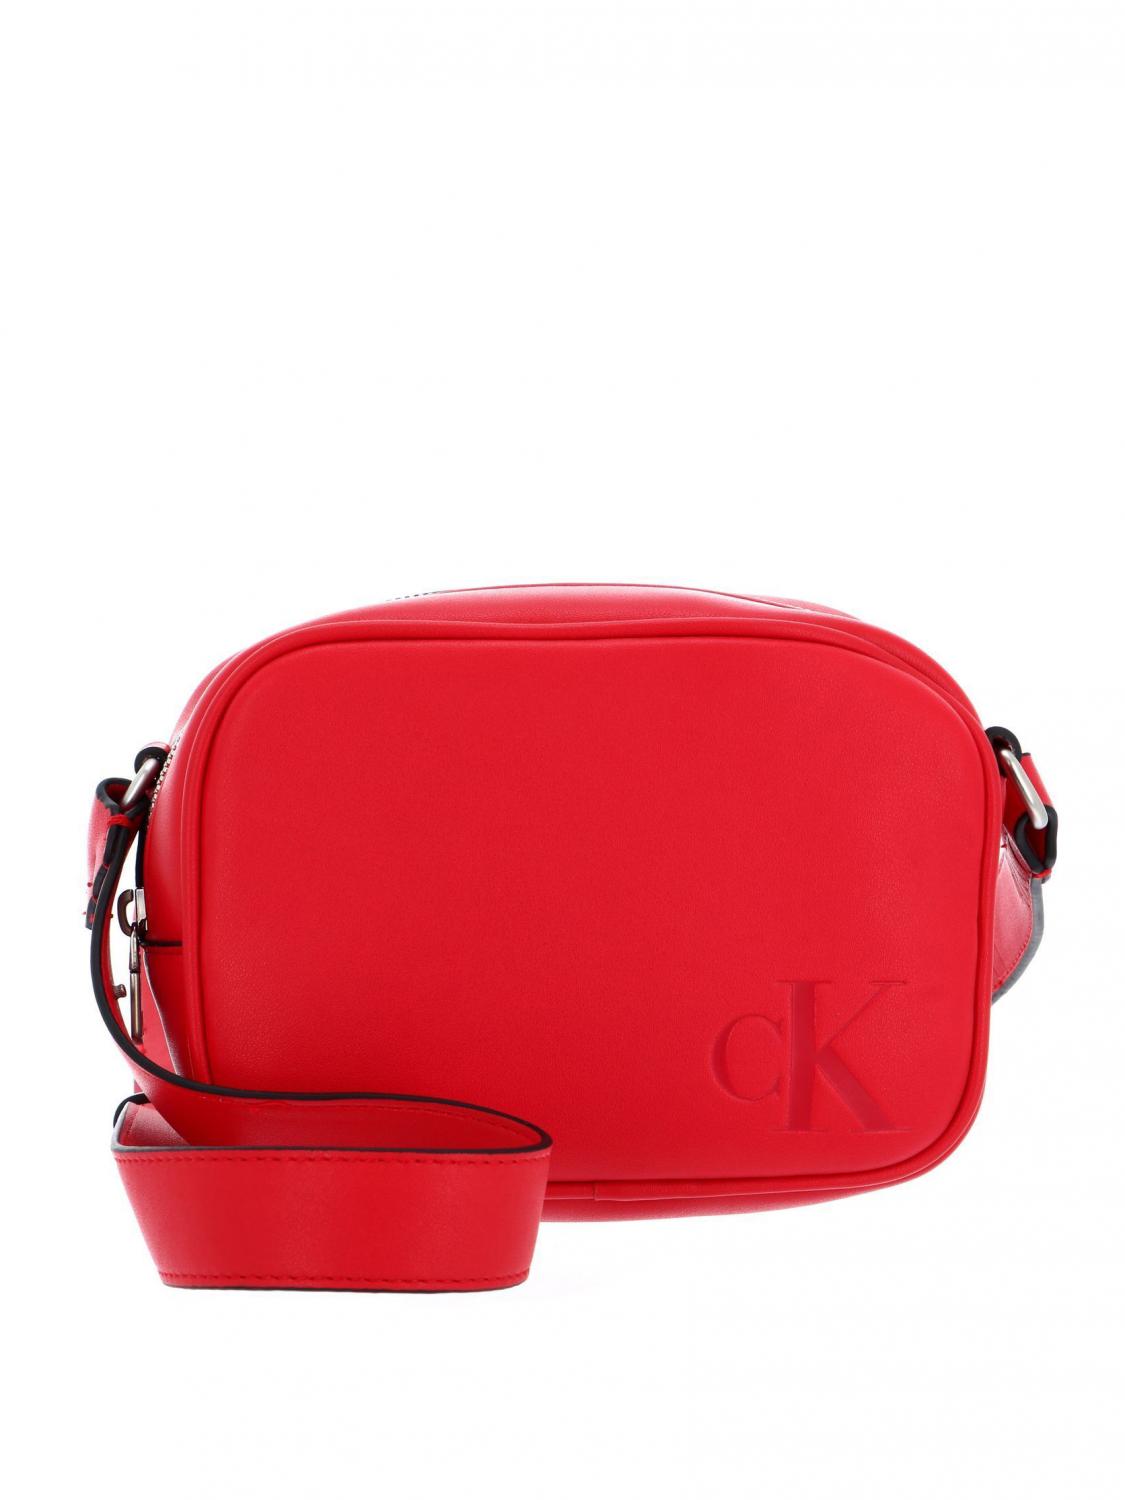 Calvin Klein Ck Jeans Sculpted Mono Camera Bag With Shoulder Strap Candy  Apple - Buy At Outlet Prices!